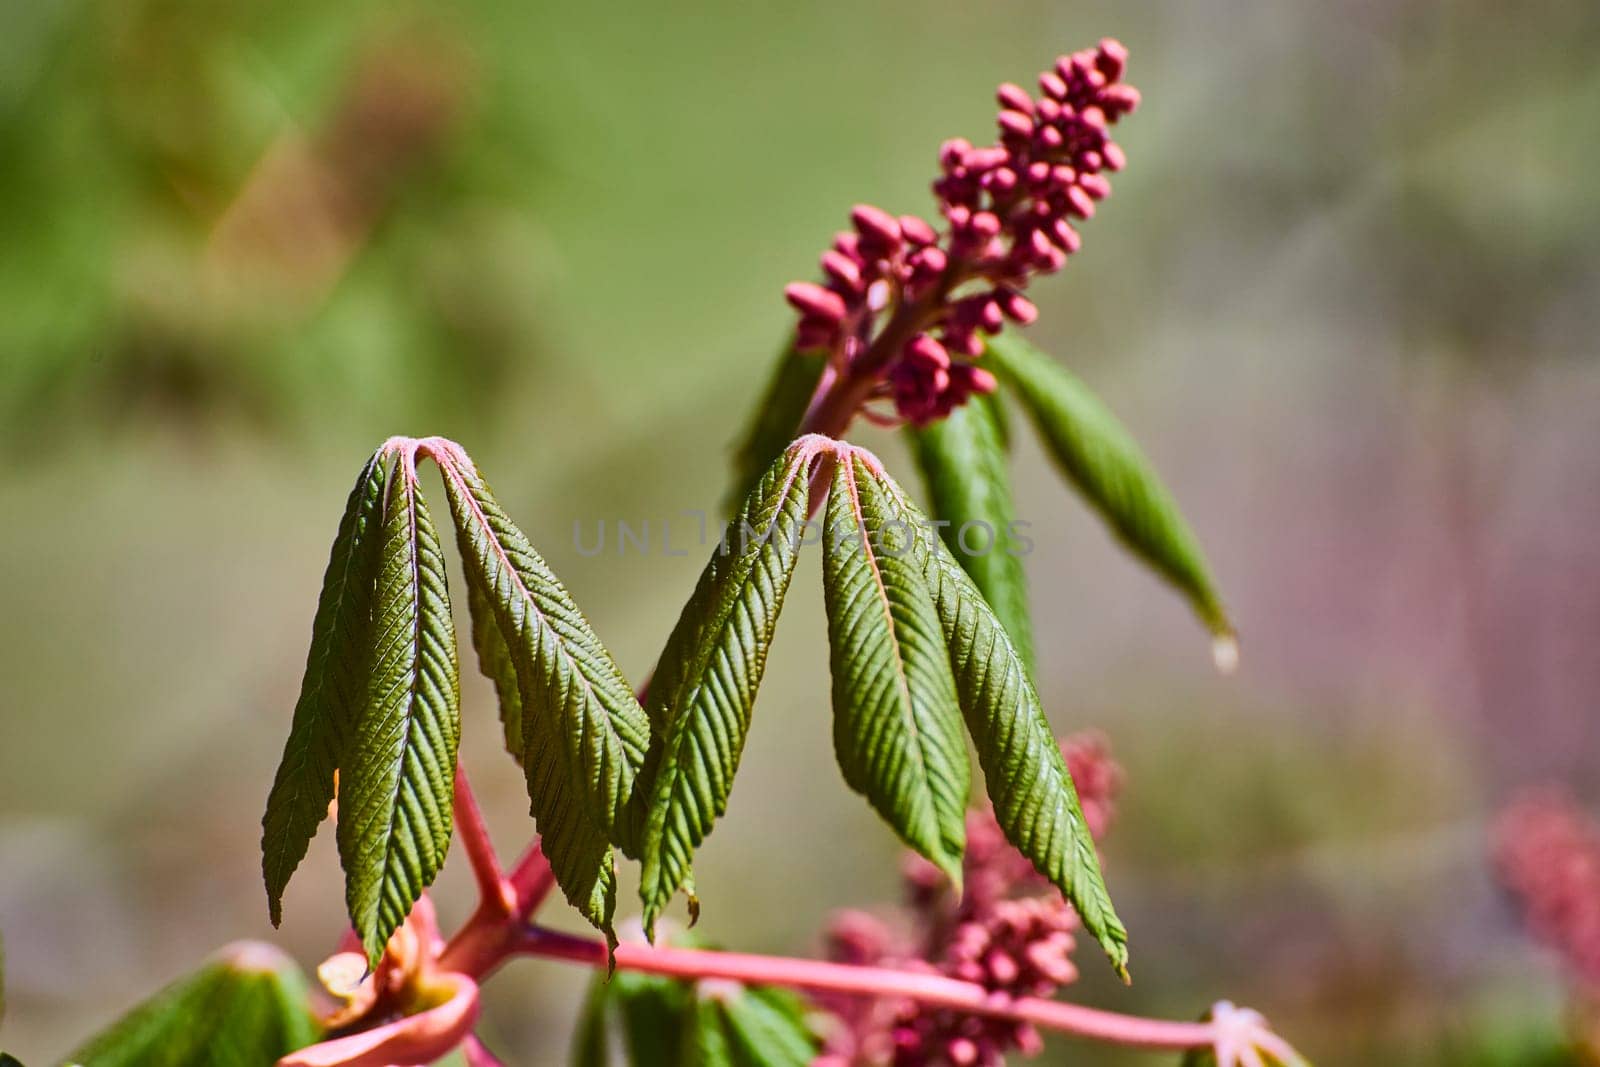 Vibrant young chestnut leaves and buds flourish in spring's embrace, captured in Fort Wayne, Indiana.